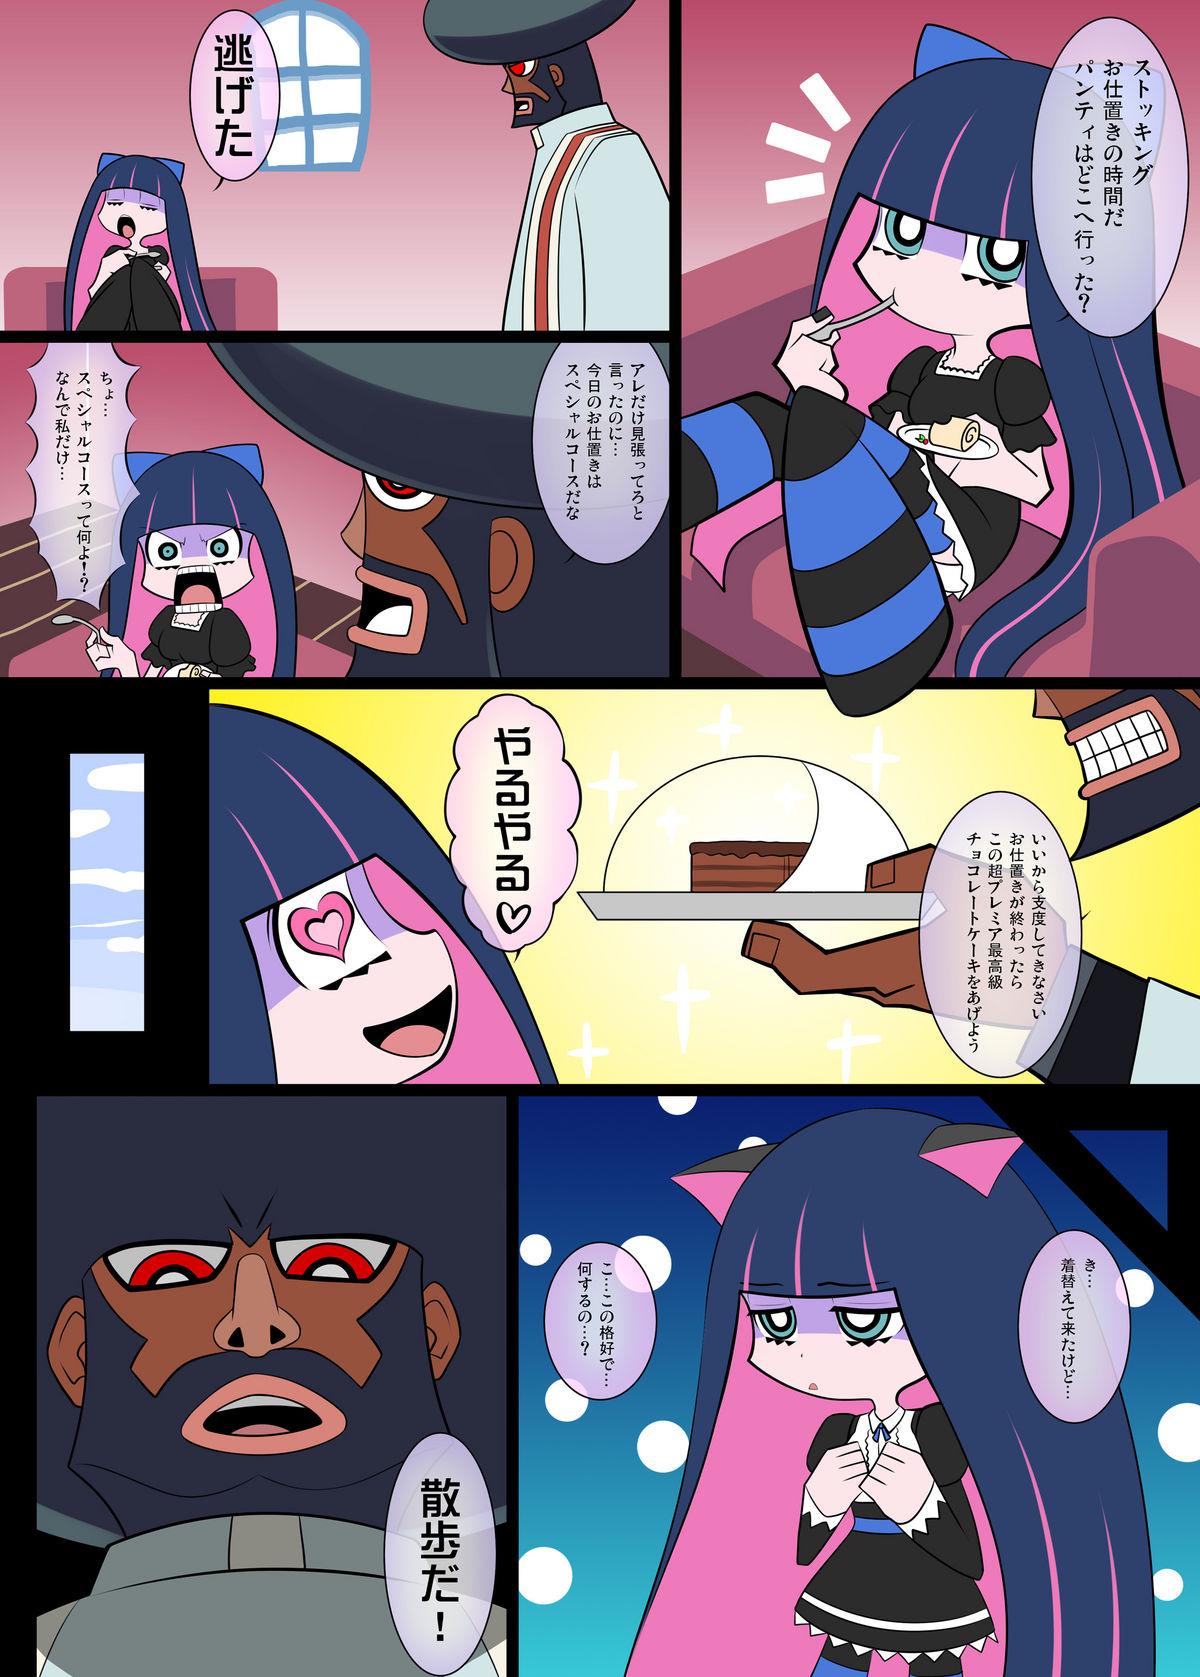 Vergon Sperma & Sweets with Villager - Panty and stocking with garterbelt Futa - Page 3